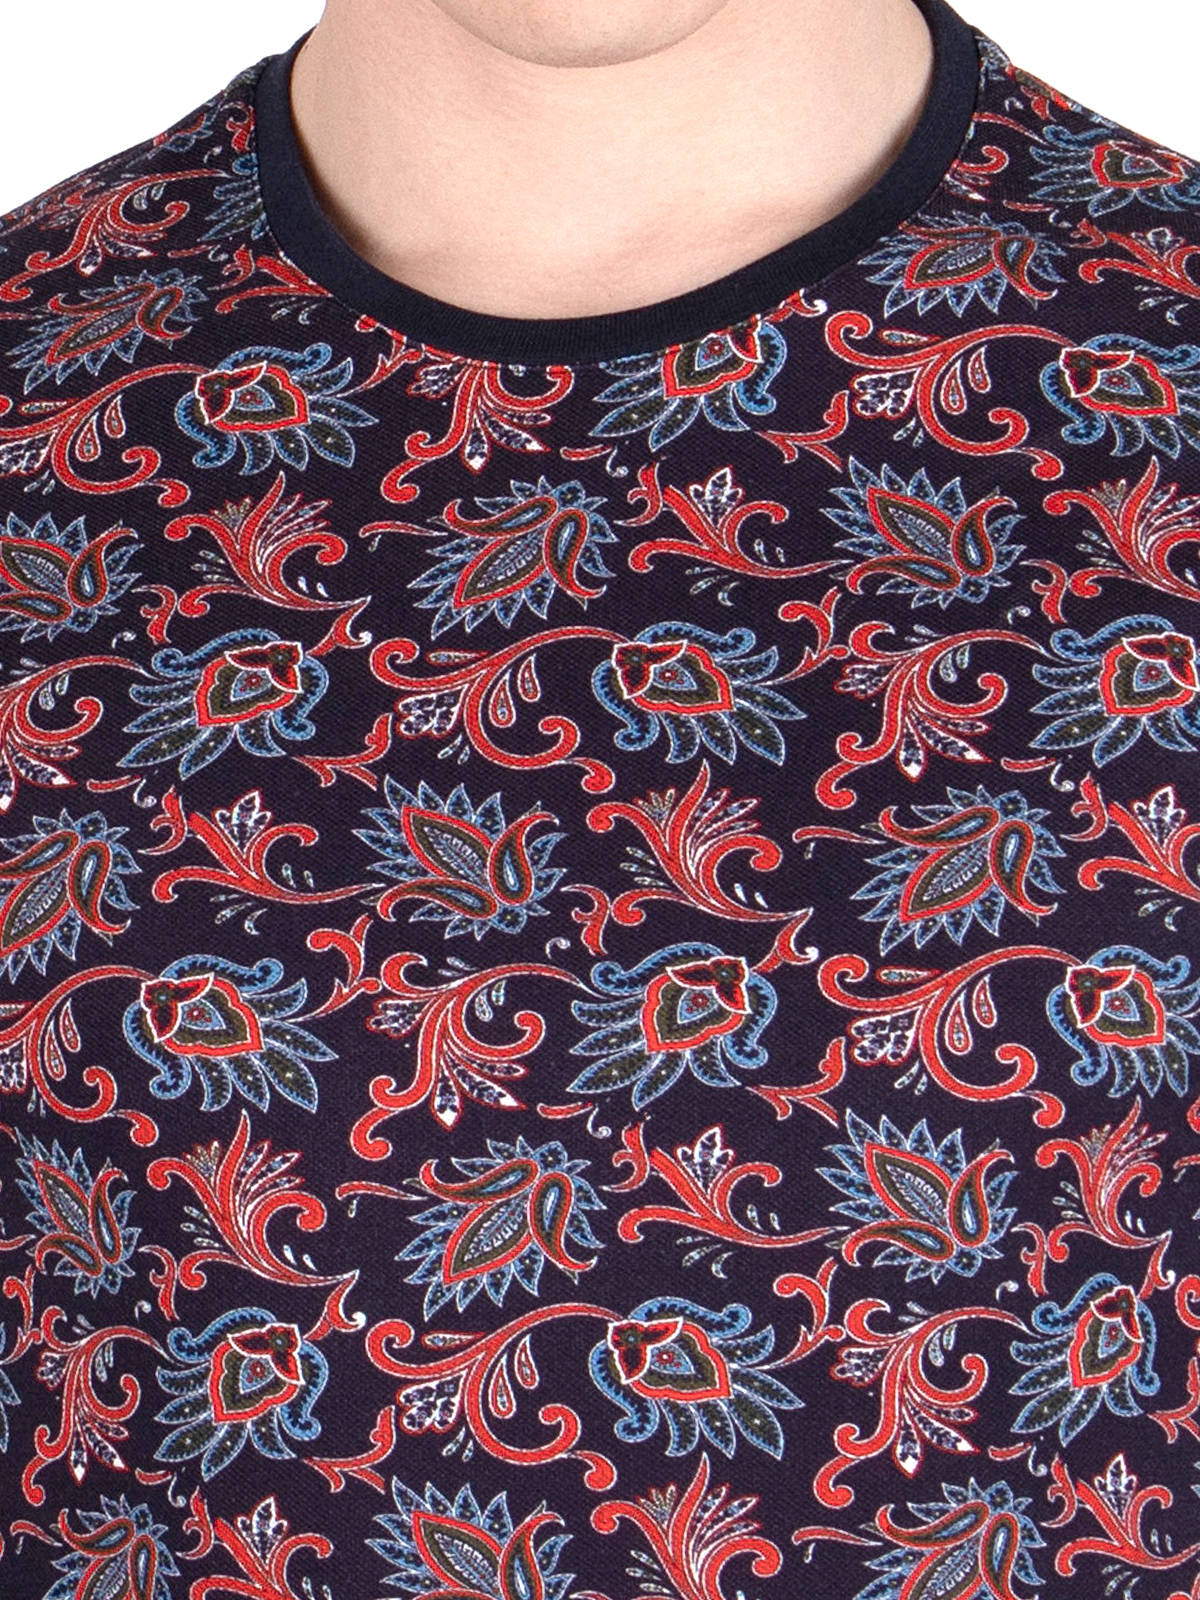 Tshirt in navy blue with floral motifs - 95360 € 16.31 img4